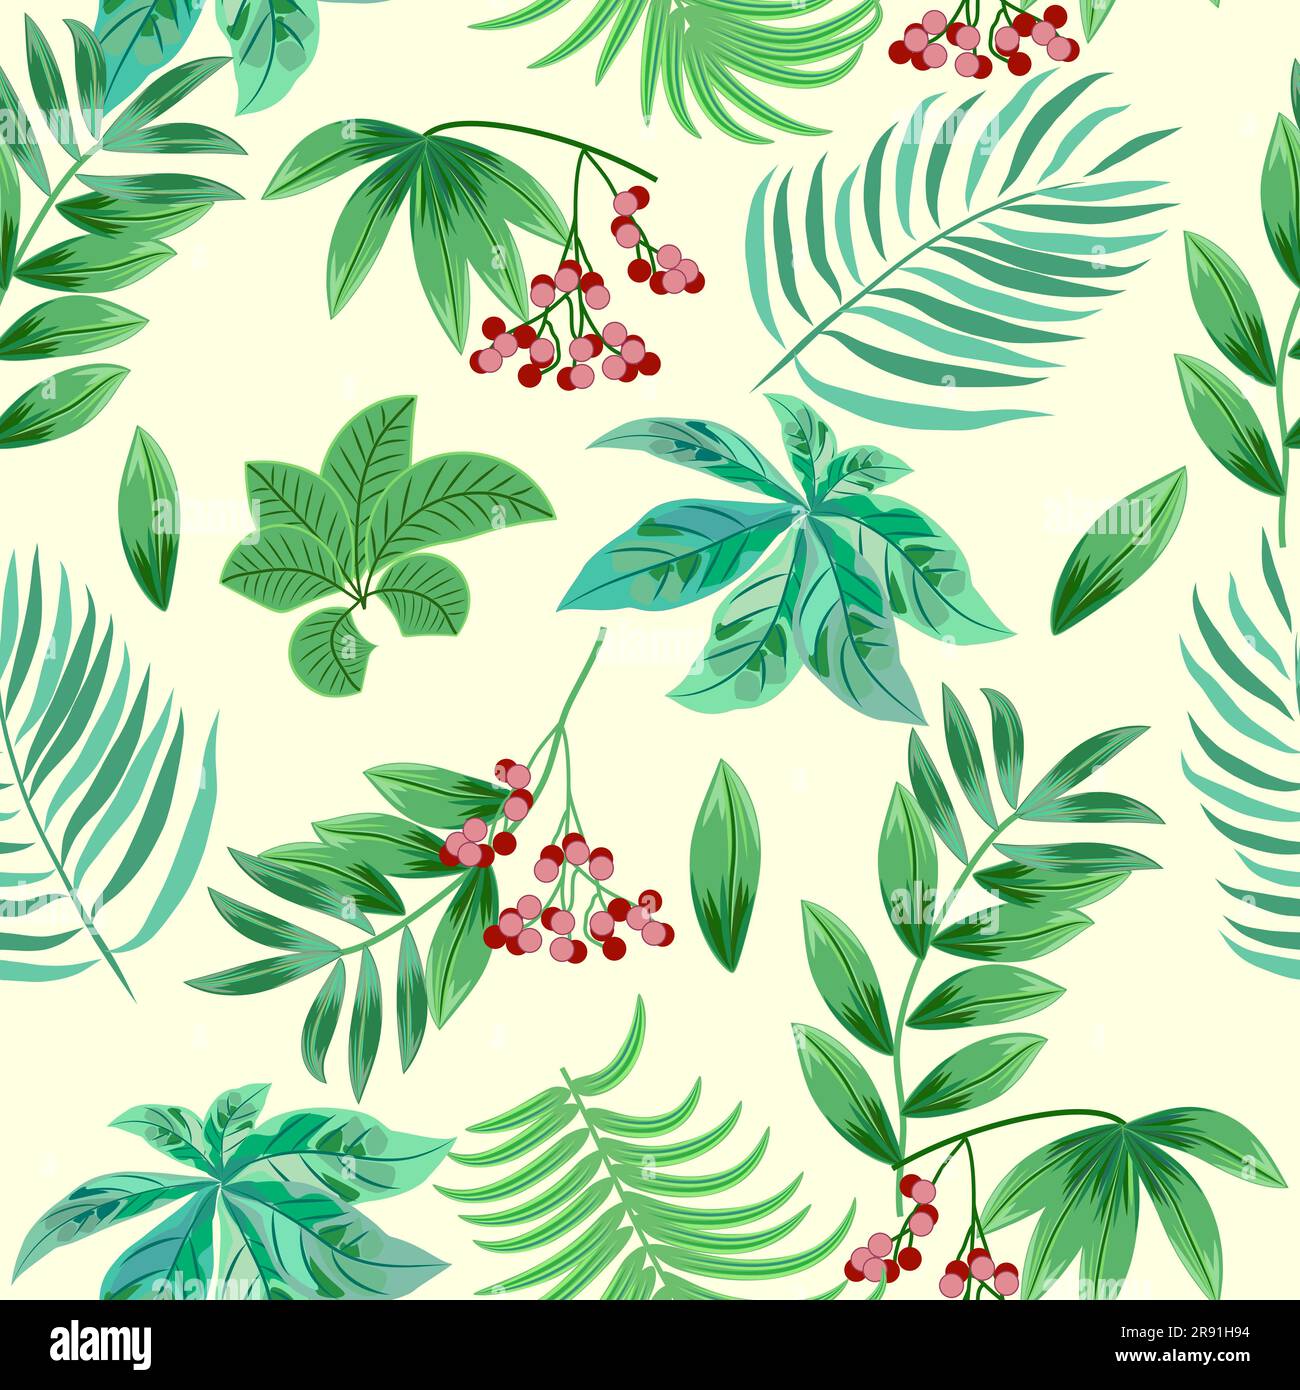 Seamless pattern with red berries and tropical leaves of palm tree. Botany vector background, jungle wallpaper. Stock Vector